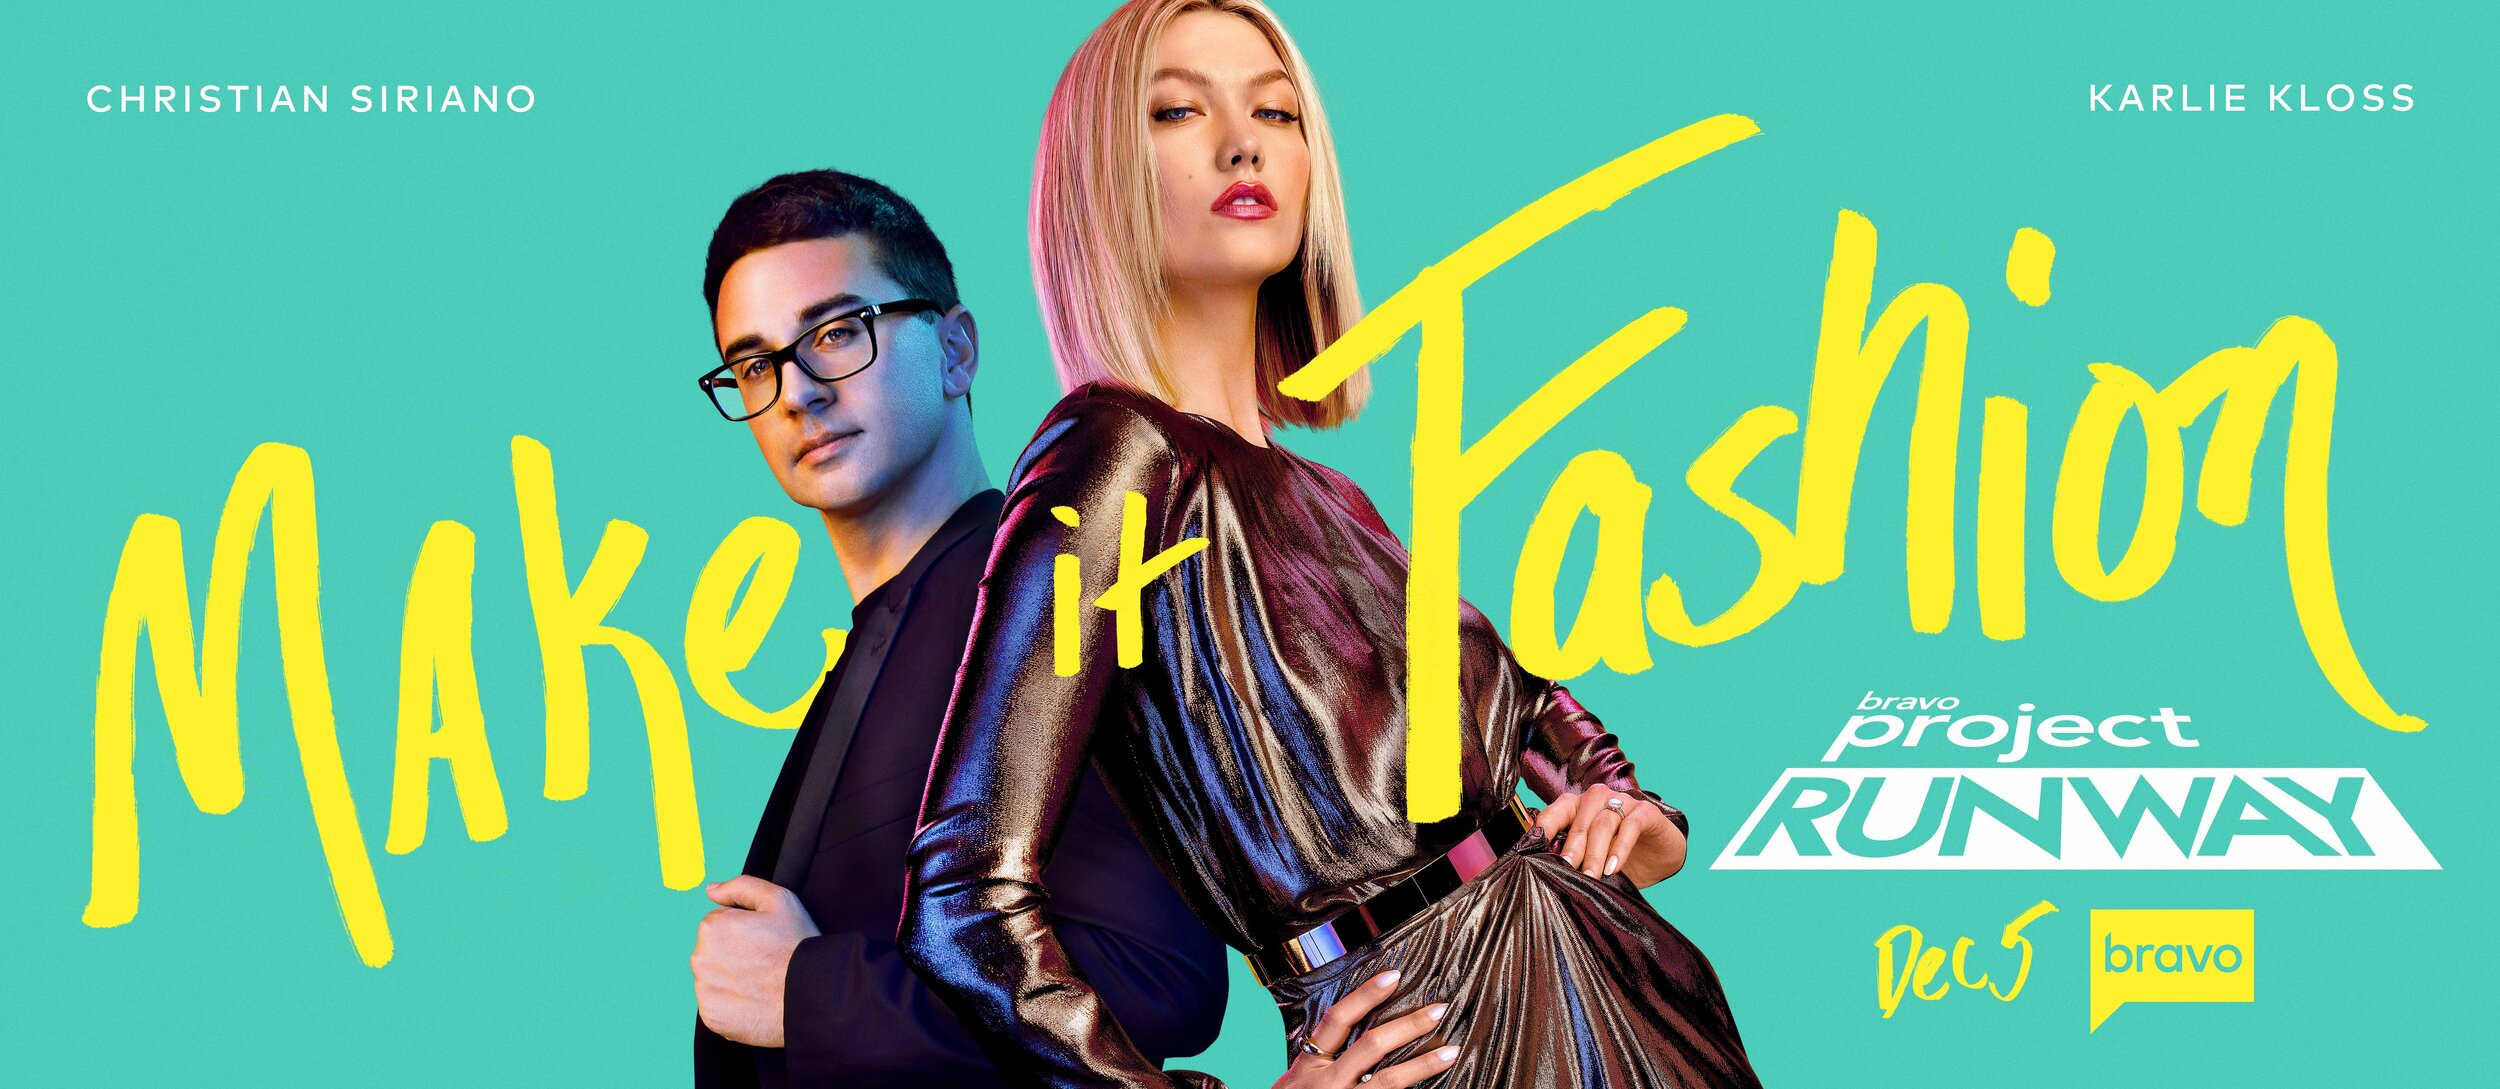 Mega Sized TV Poster Image for Project Runway (#21 of 21)